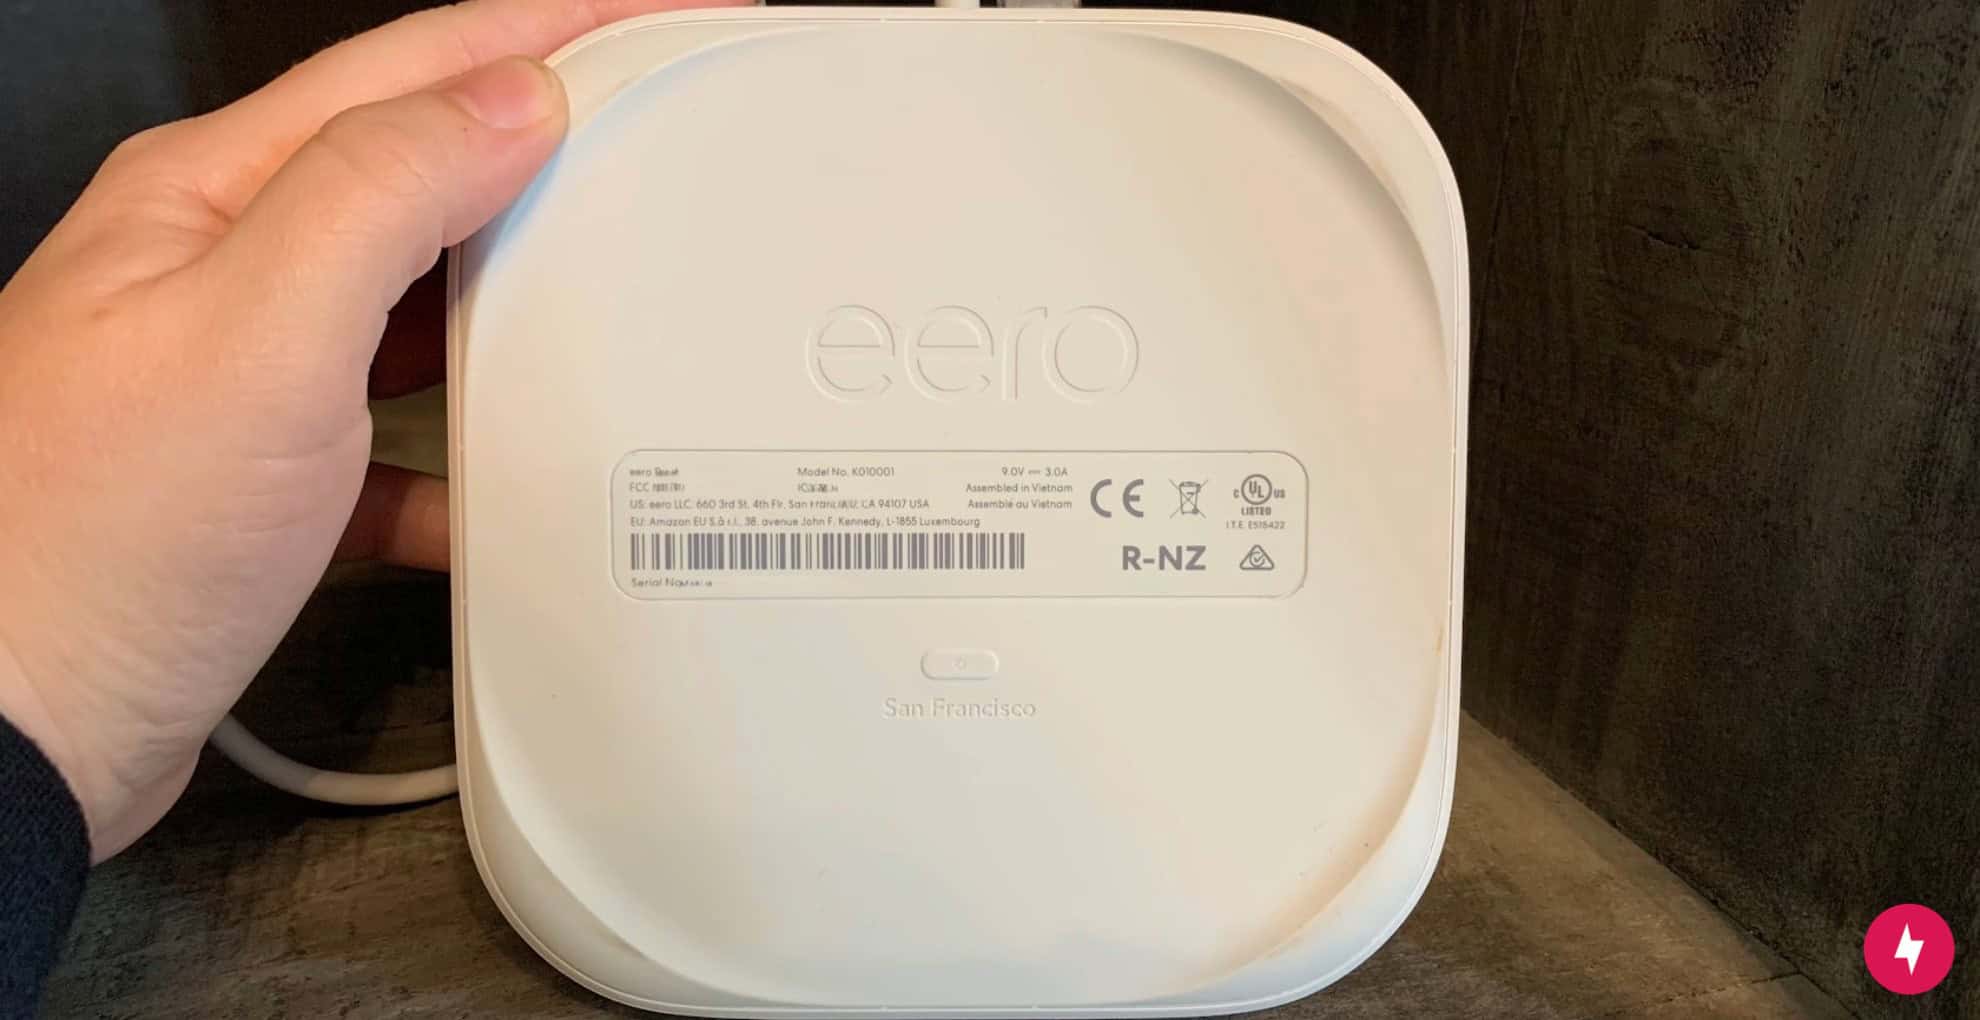 The back of a white Eero Pro 6 device to show the location of the reset button.